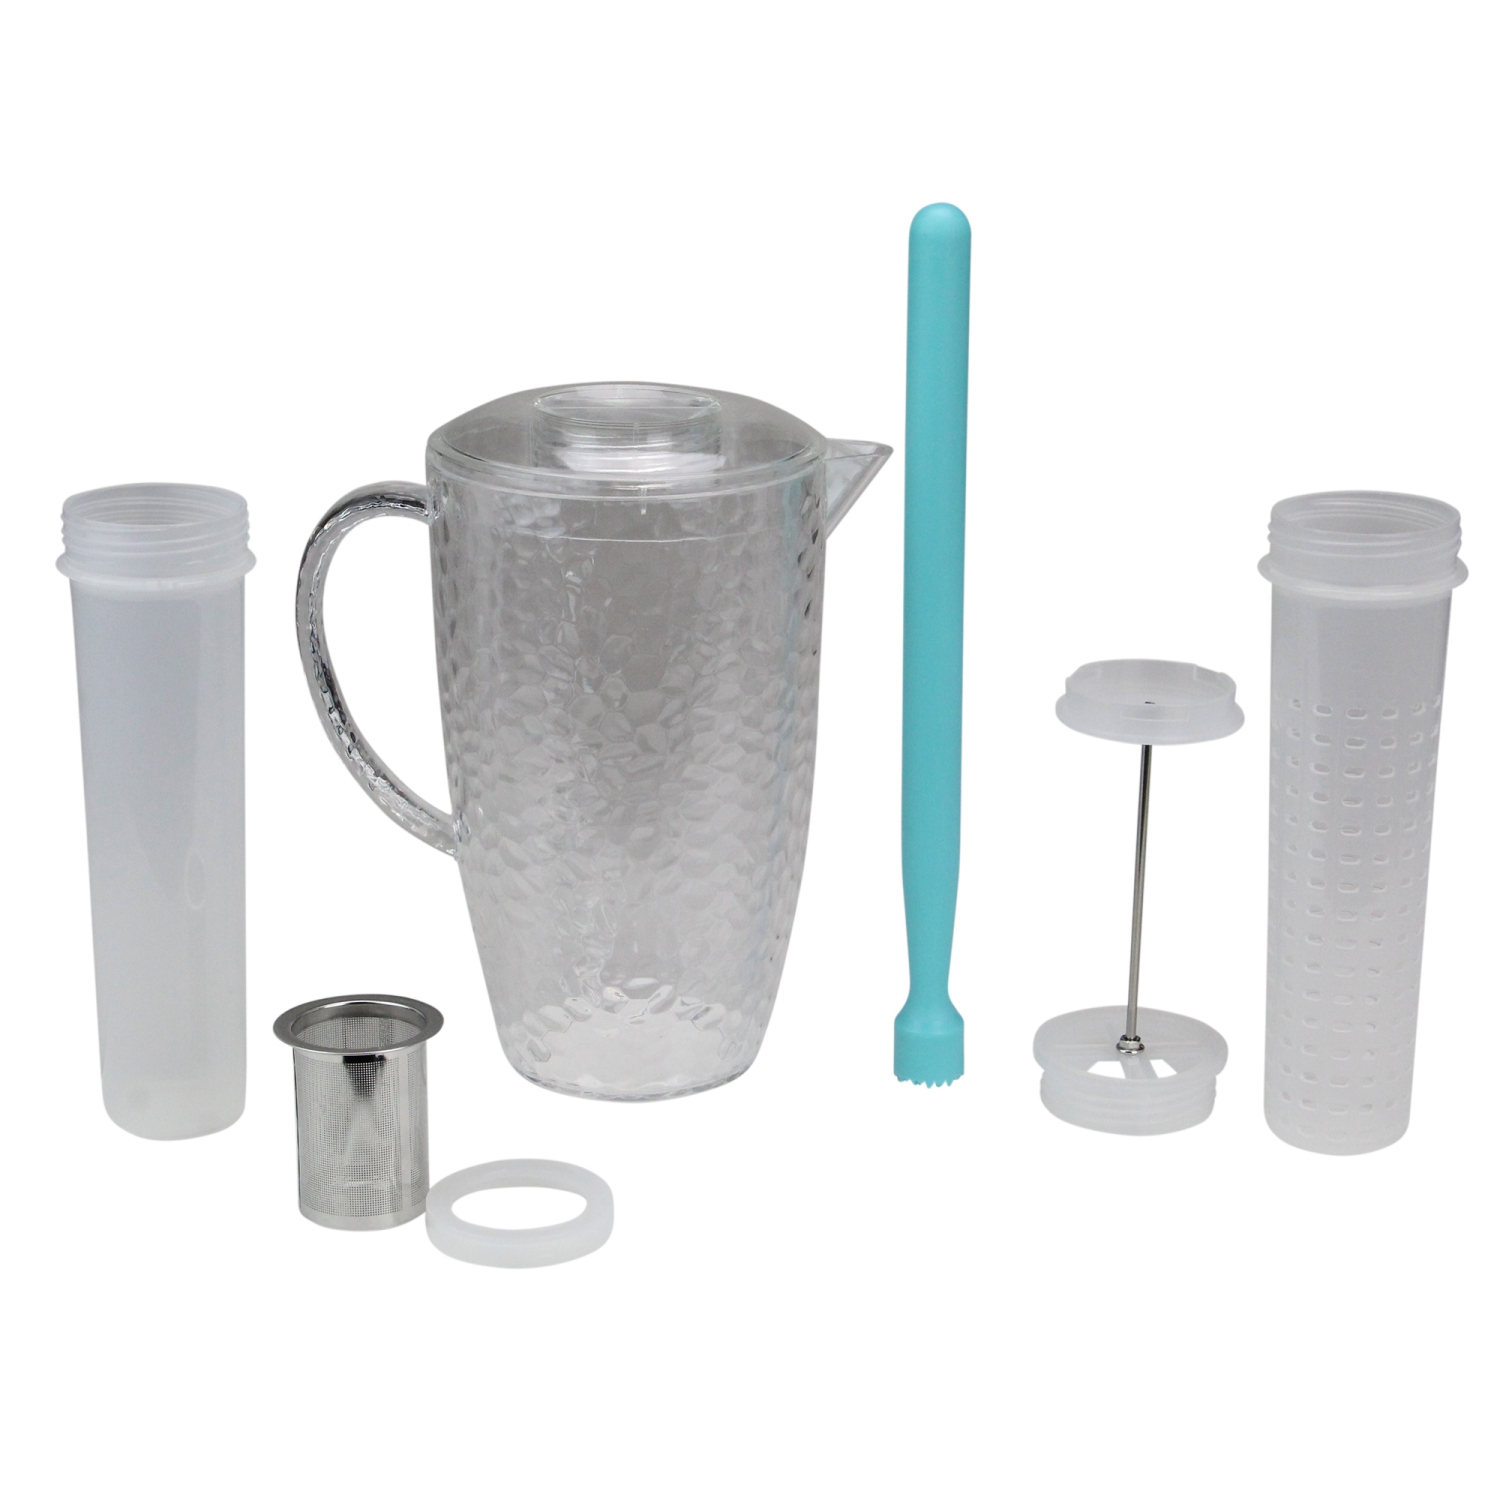 9.5" Four in one Flavor Infuser Pitcher- 2 Liter